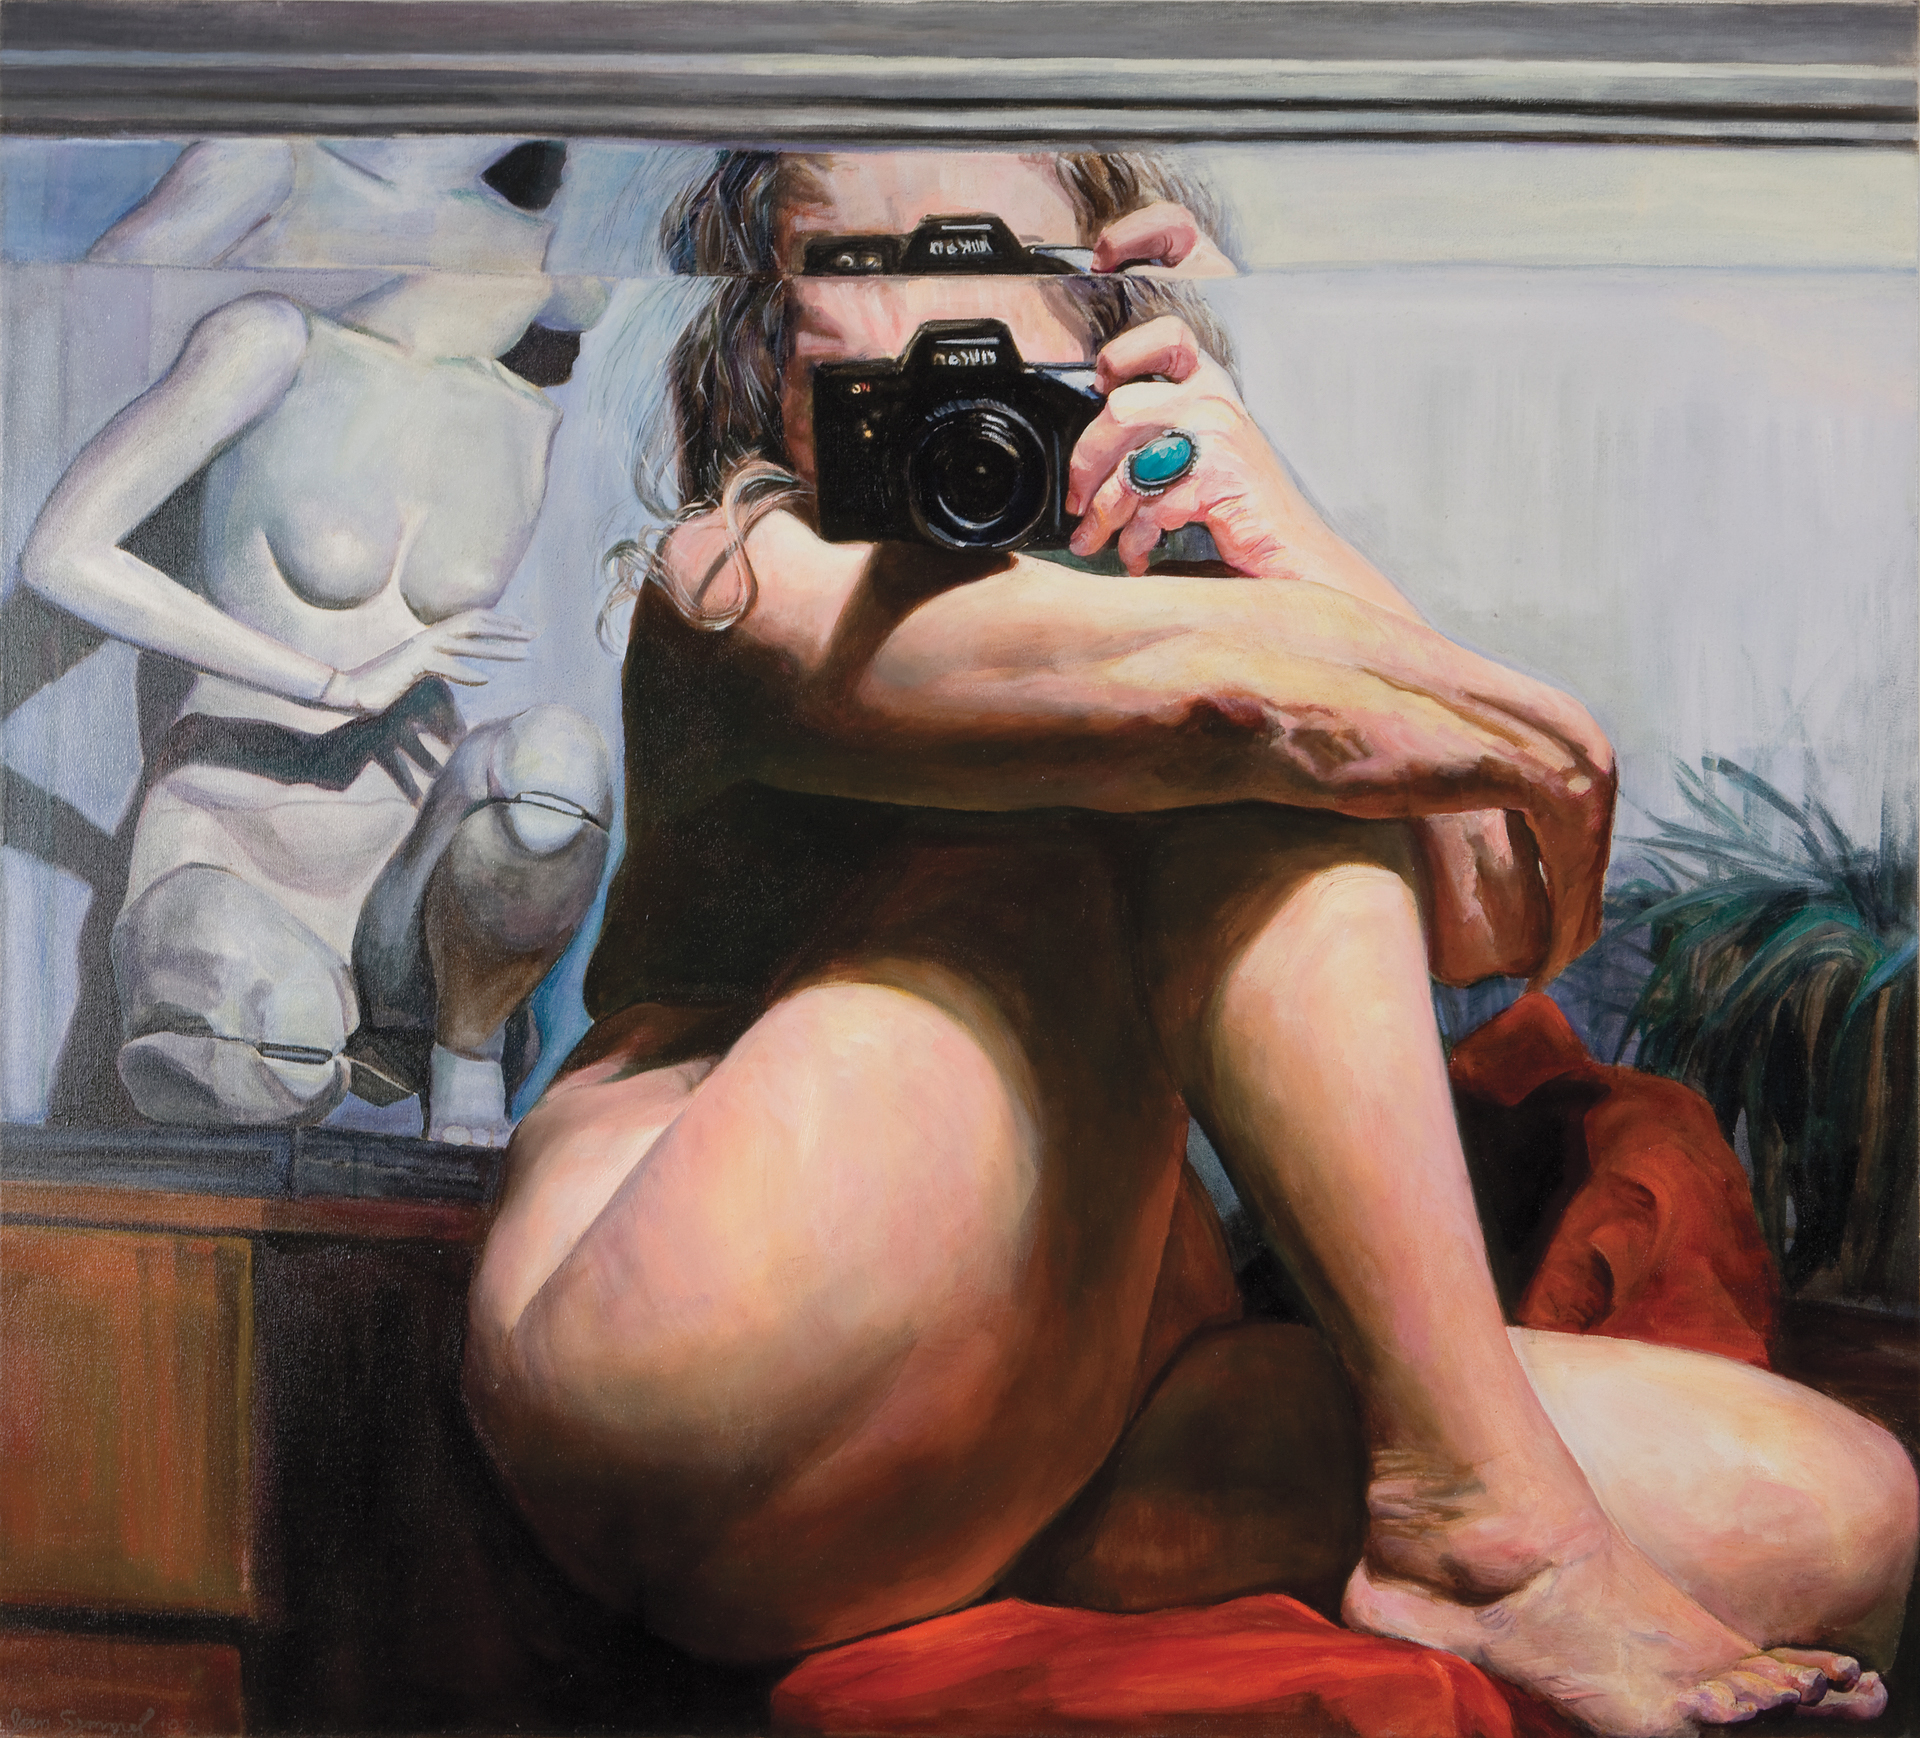 A painting of naked woman with long gray hair, who is taking a selfie in a mirror and squatting next to a mannequin.